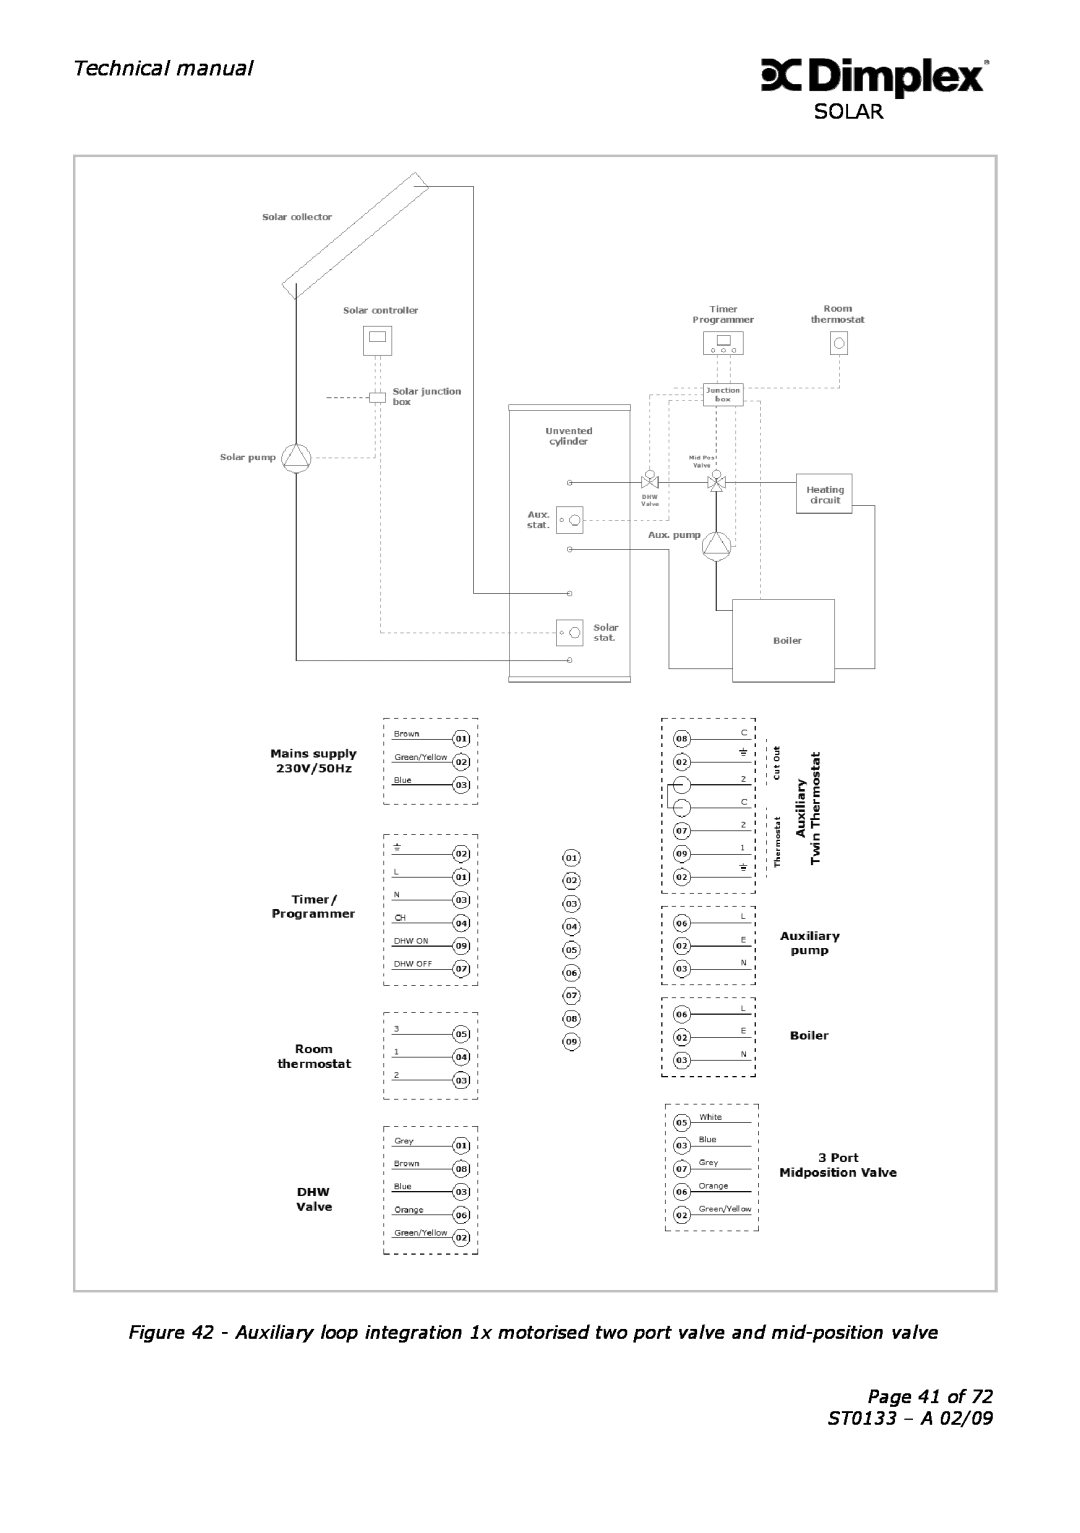 Dimplex technical manual Technical manual, Page 41 of ST0133 - A 02/09 